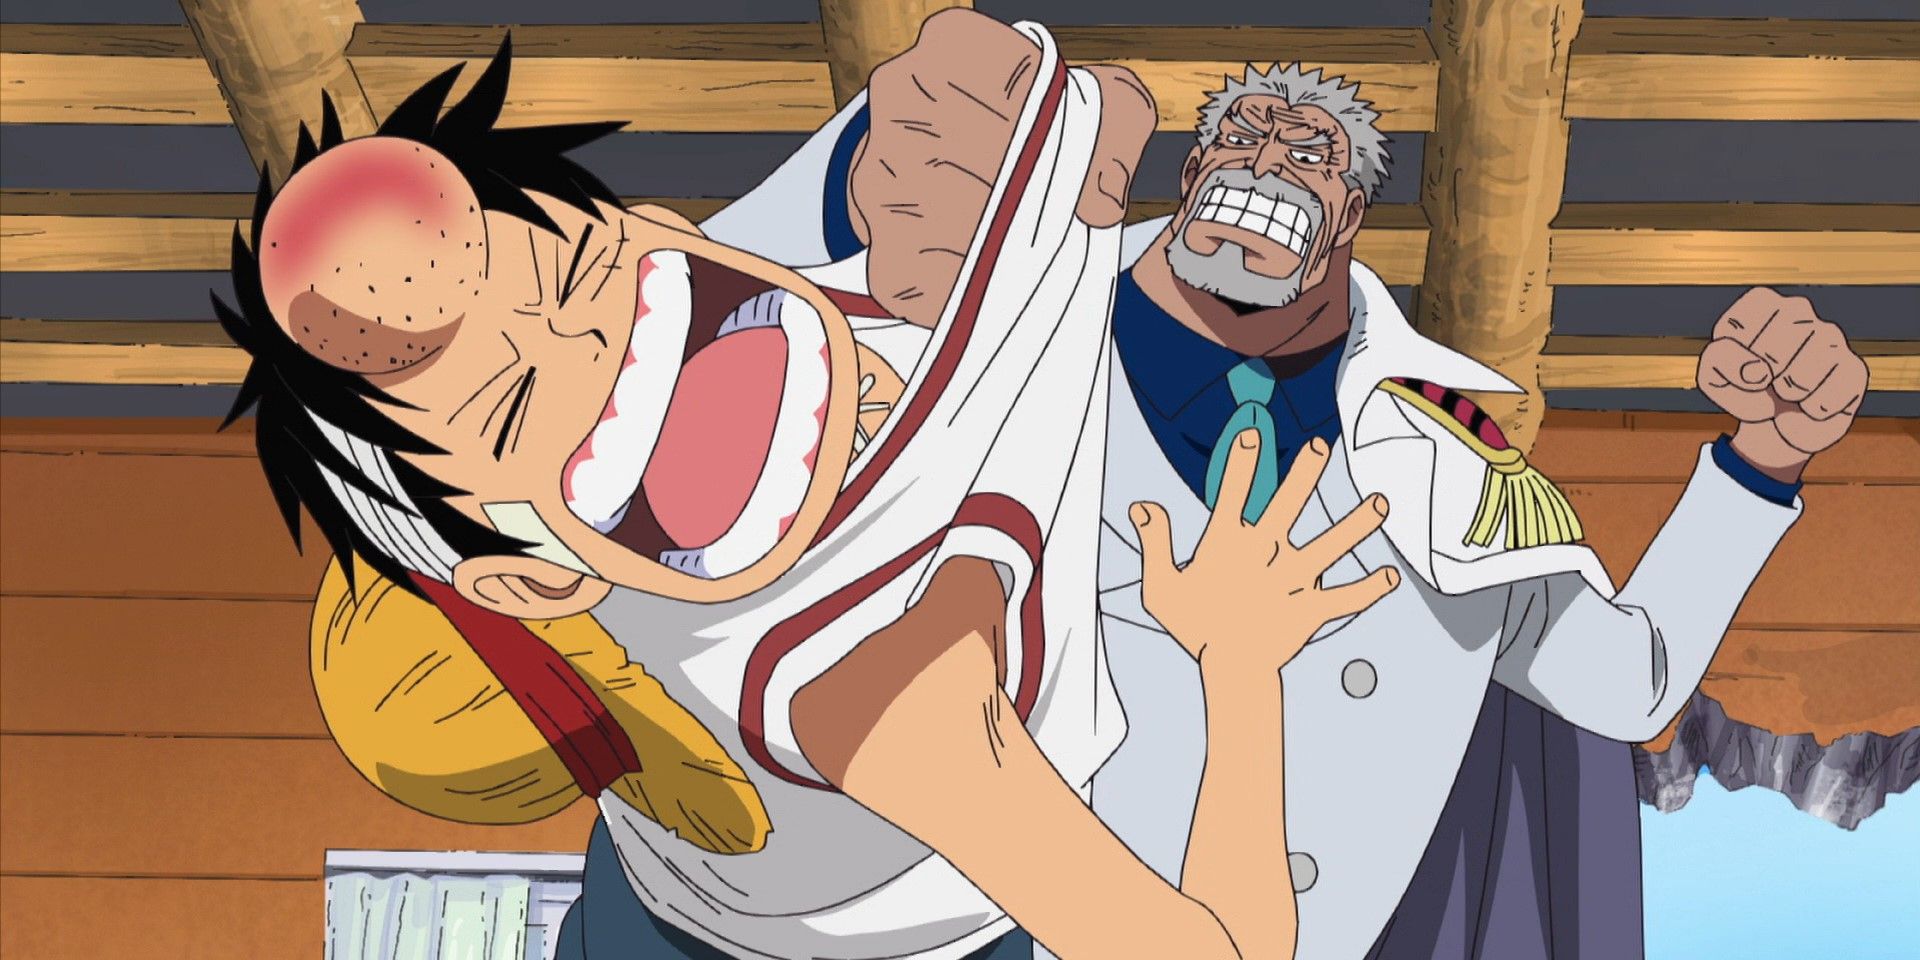 Garp hits Luffy during Water 7 in One Piece.